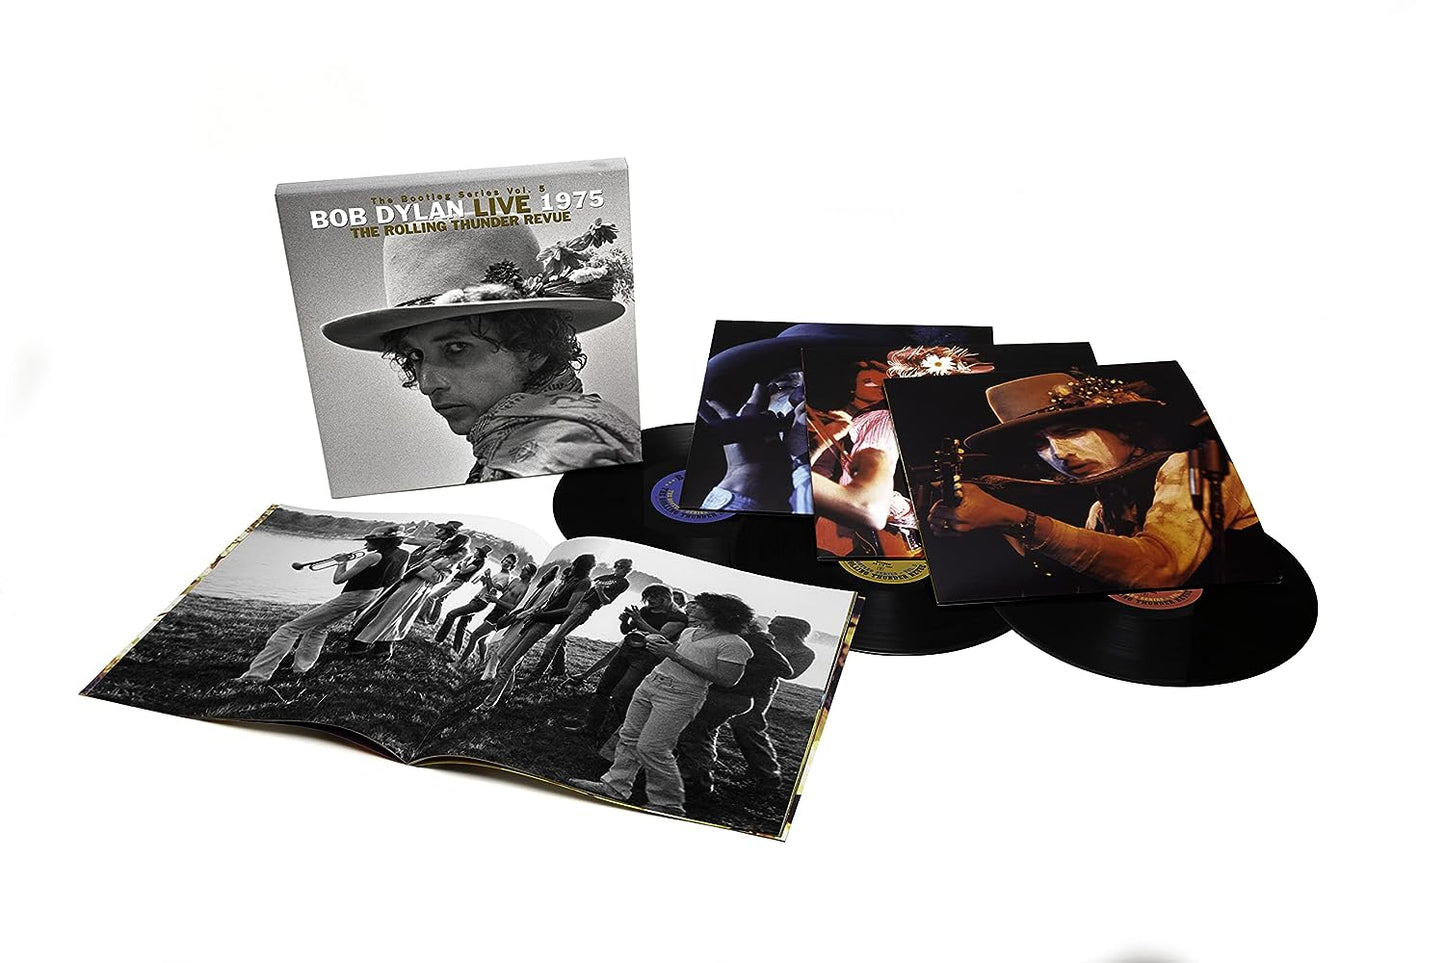 Bob Dylan - "The Rolling Thunder Revue: The 1975 Live Recordings" Box Set